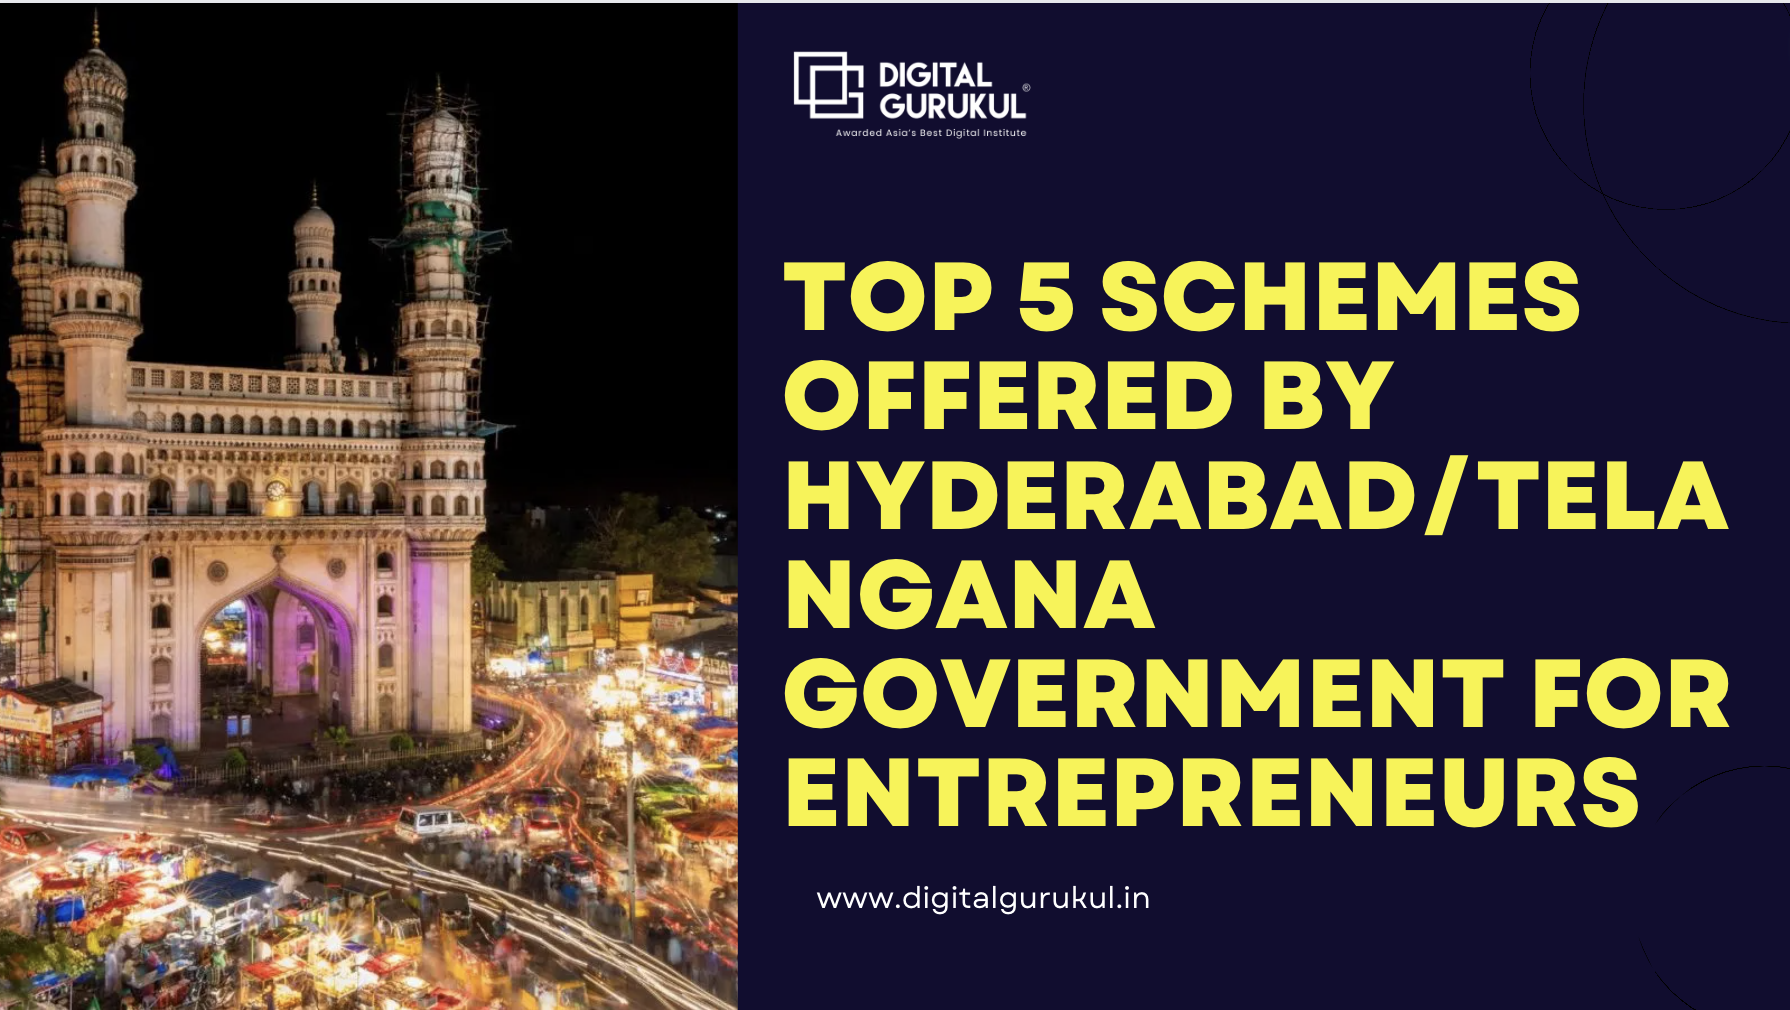 Top 5 schemes/programs offered by Hyderabad/Telangana government for entrepreneurs